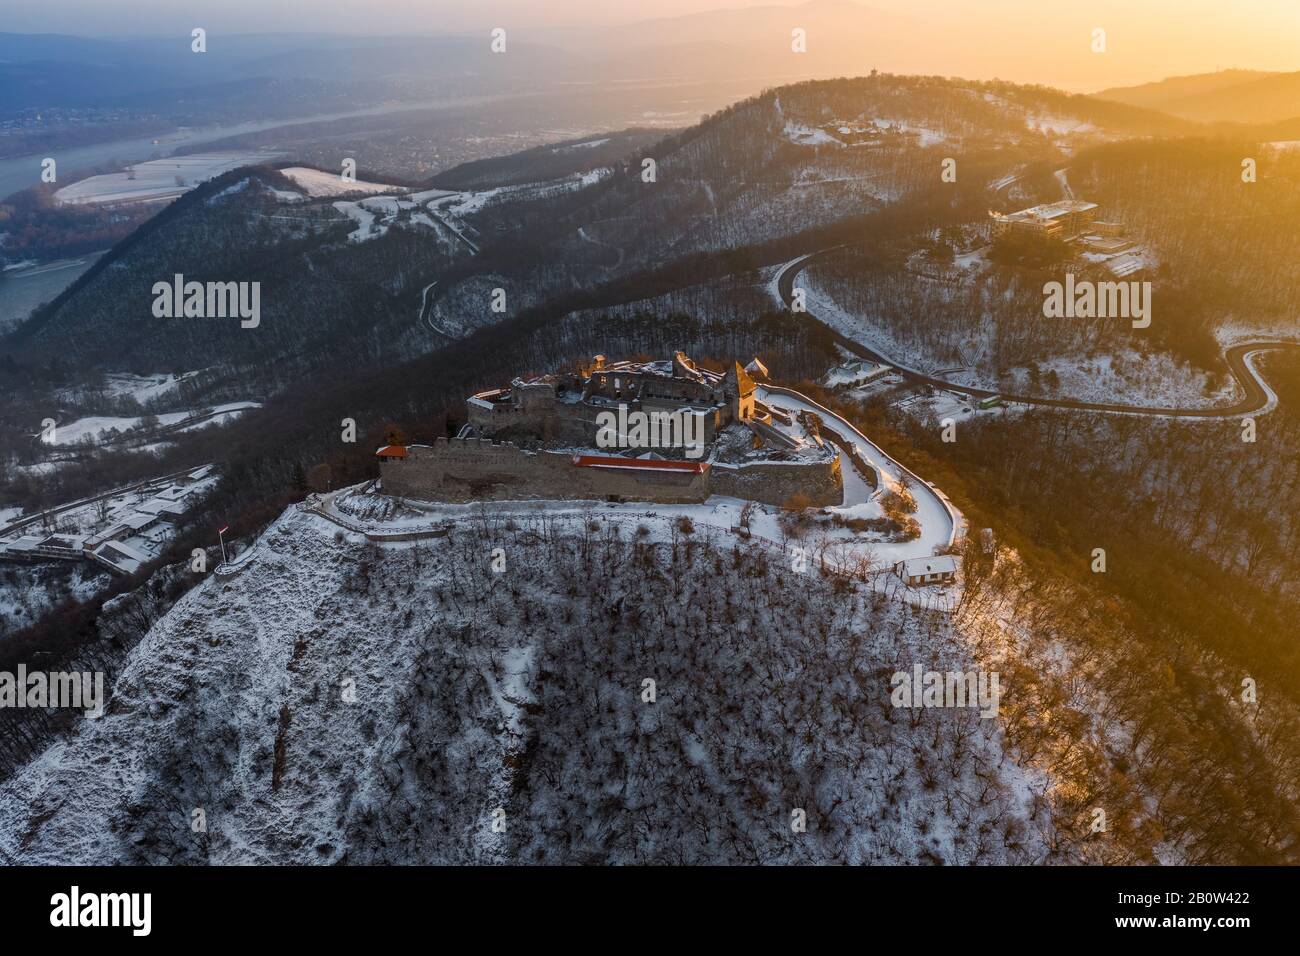 Visegrad, Hungary - Aerial panoramic view of the beautiful old and snowy high castle of Visegrad at sunrise on a winter morning with the hills of Pili Stock Photo